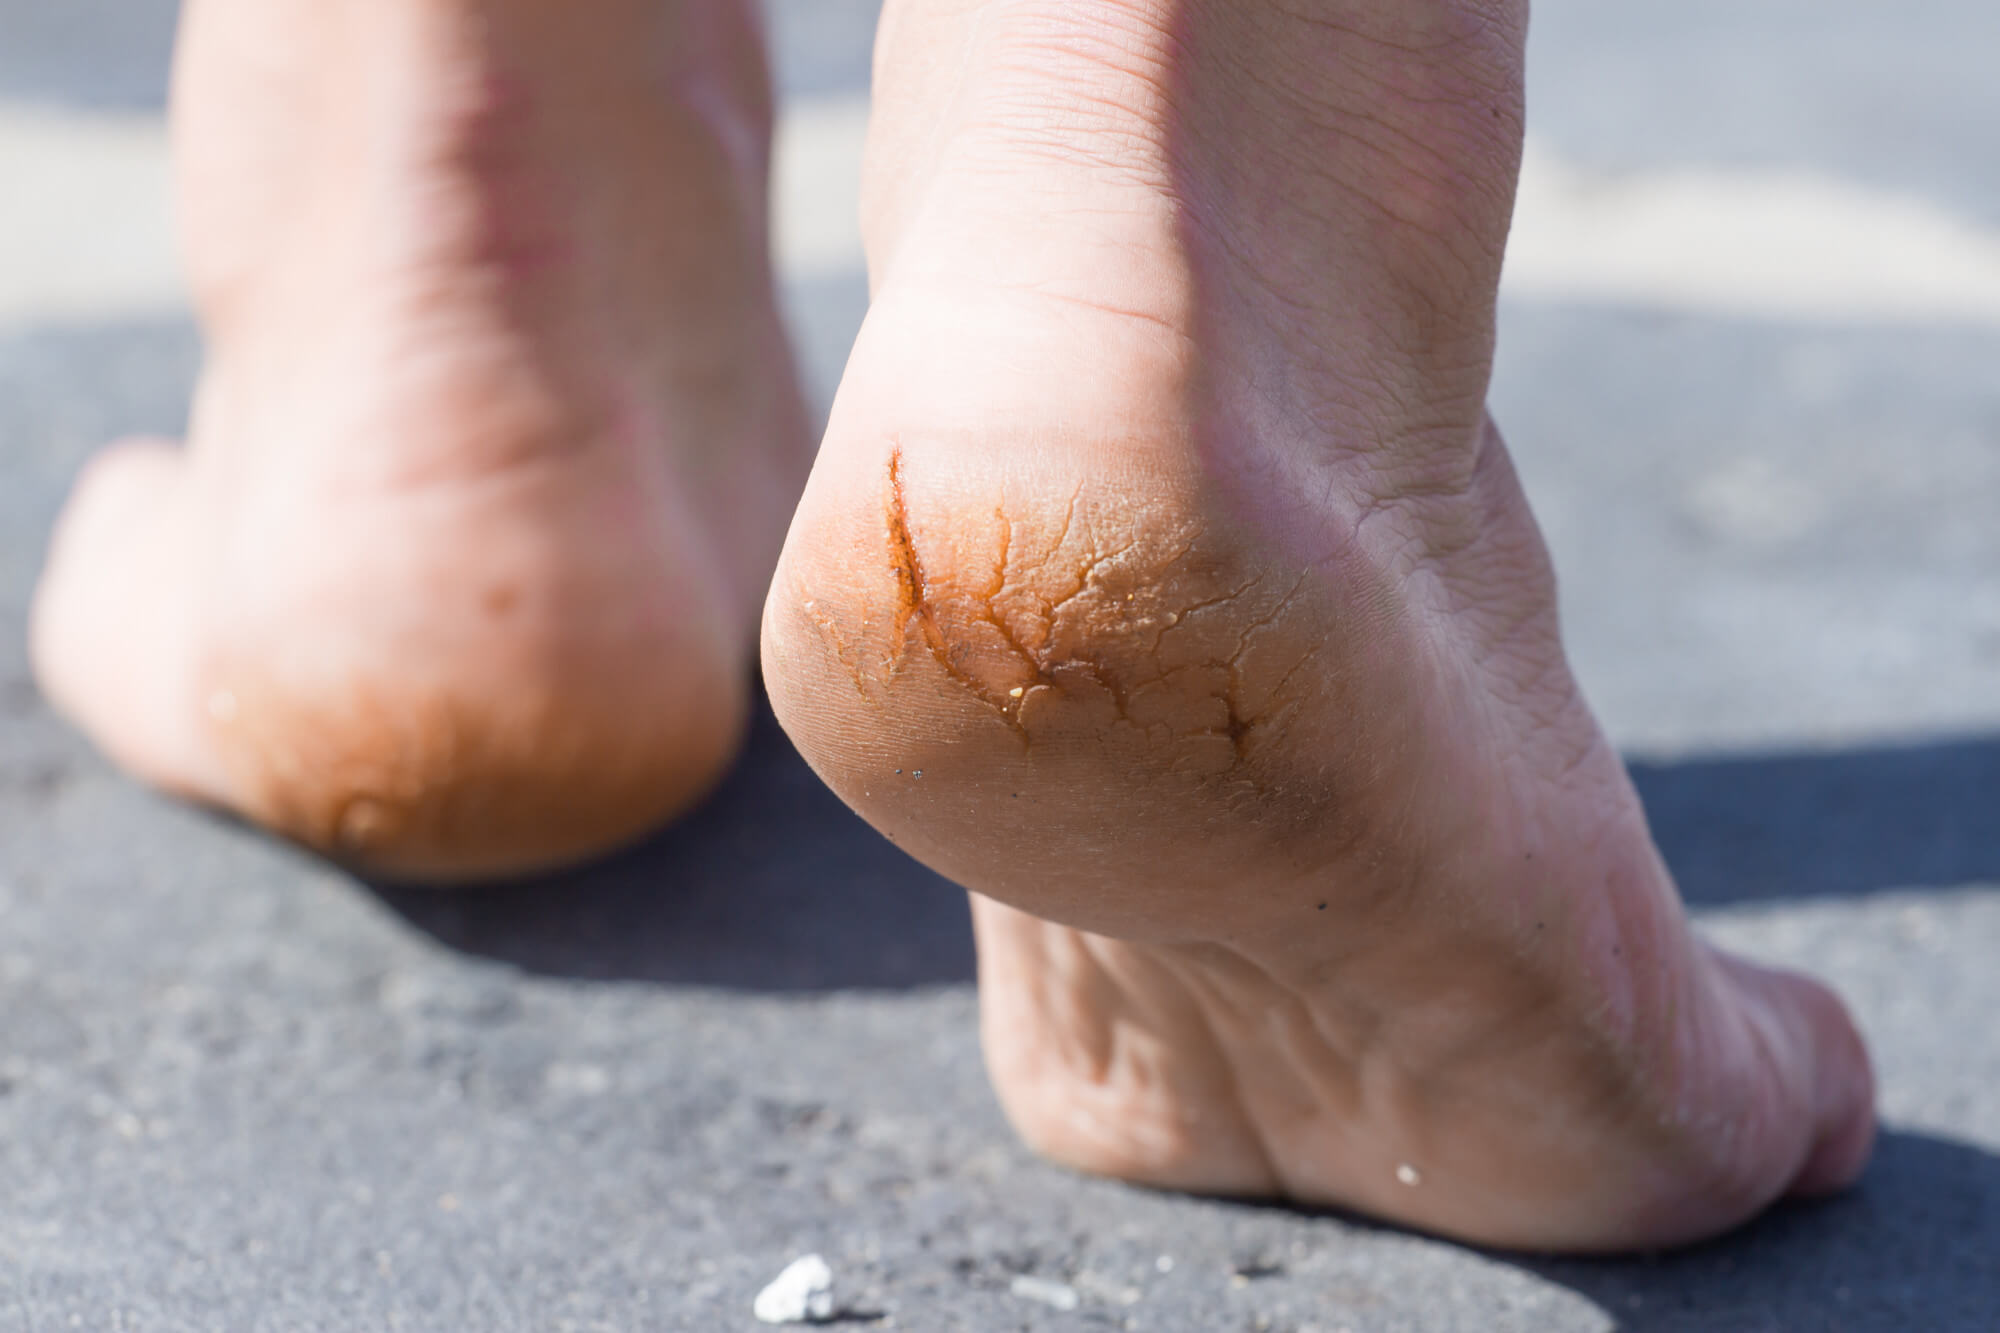 Dry Skin and Foot Problems - The Causes and How to Eliminate Dry Skin